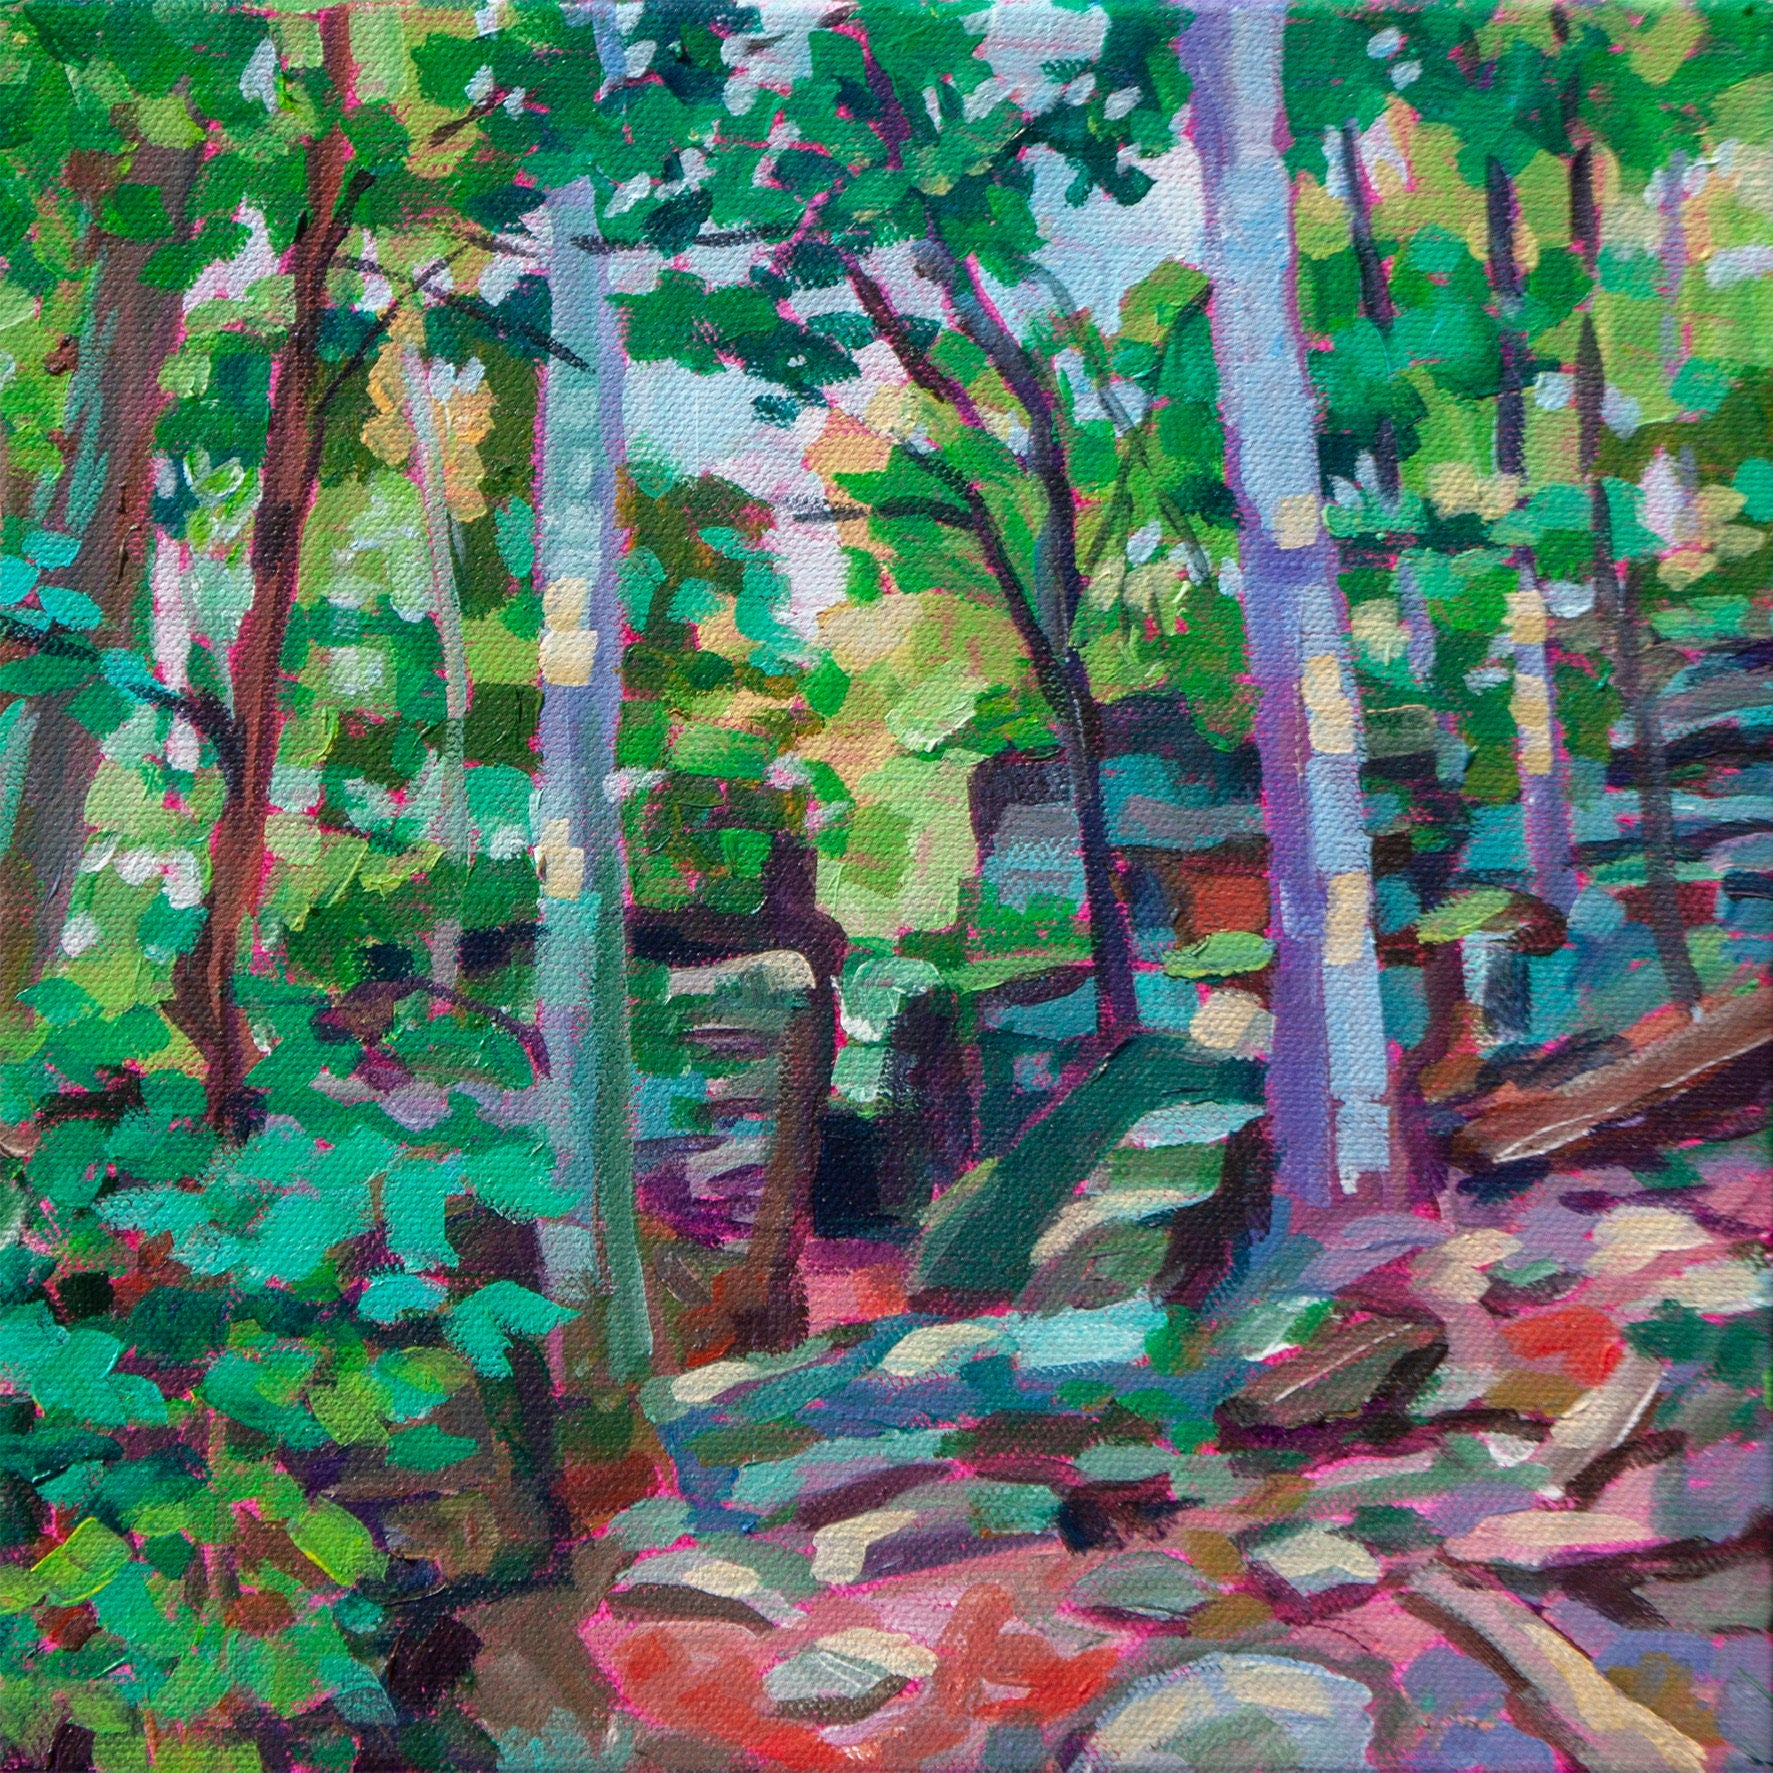 second ledges painting highlighting trees, greenery and rock formations